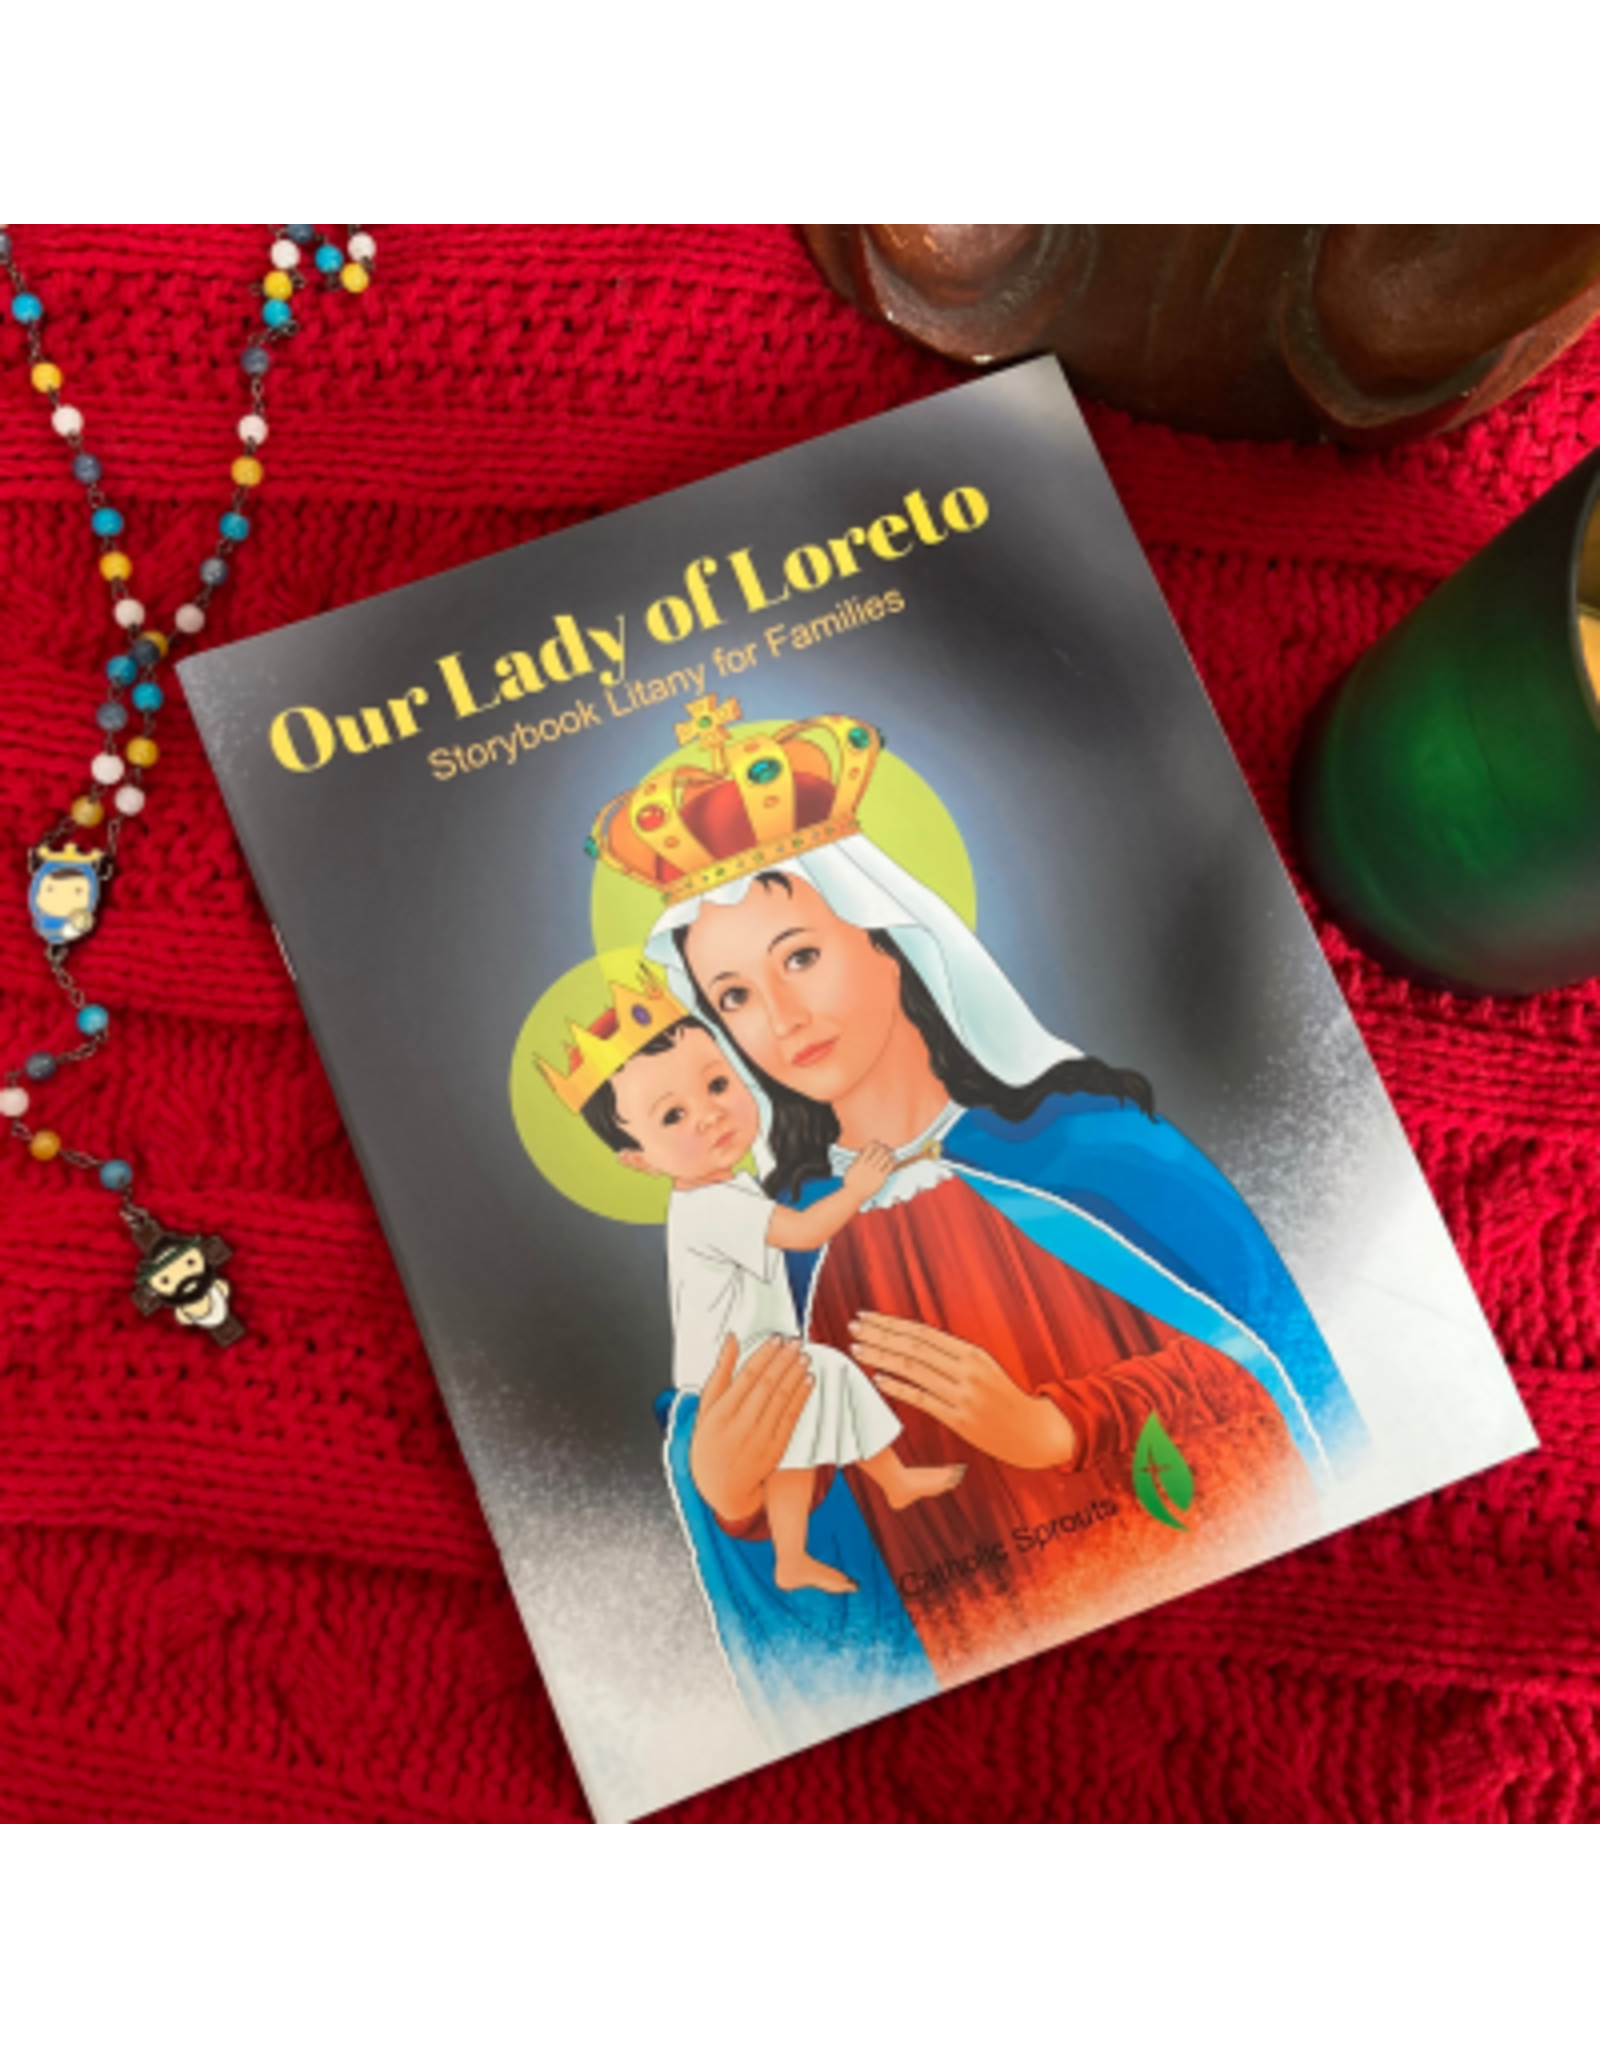 Catholic Sprouts Our Lady of Loreto: Storybook Litany for Catholic Families